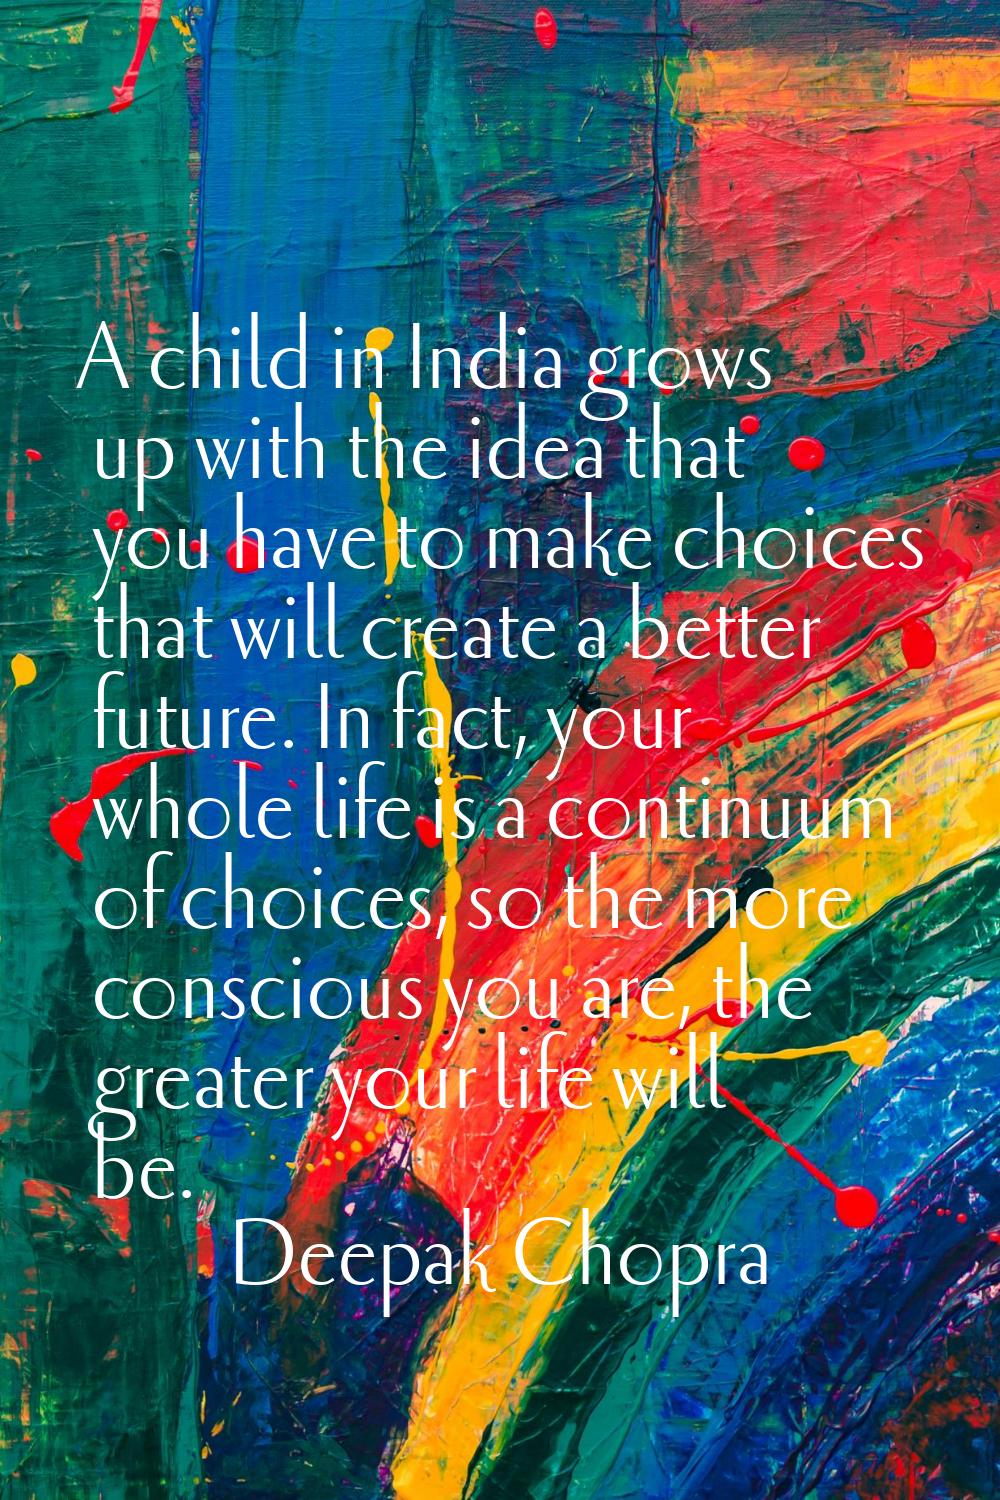 A child in India grows up with the idea that you have to make choices that will create a better fut